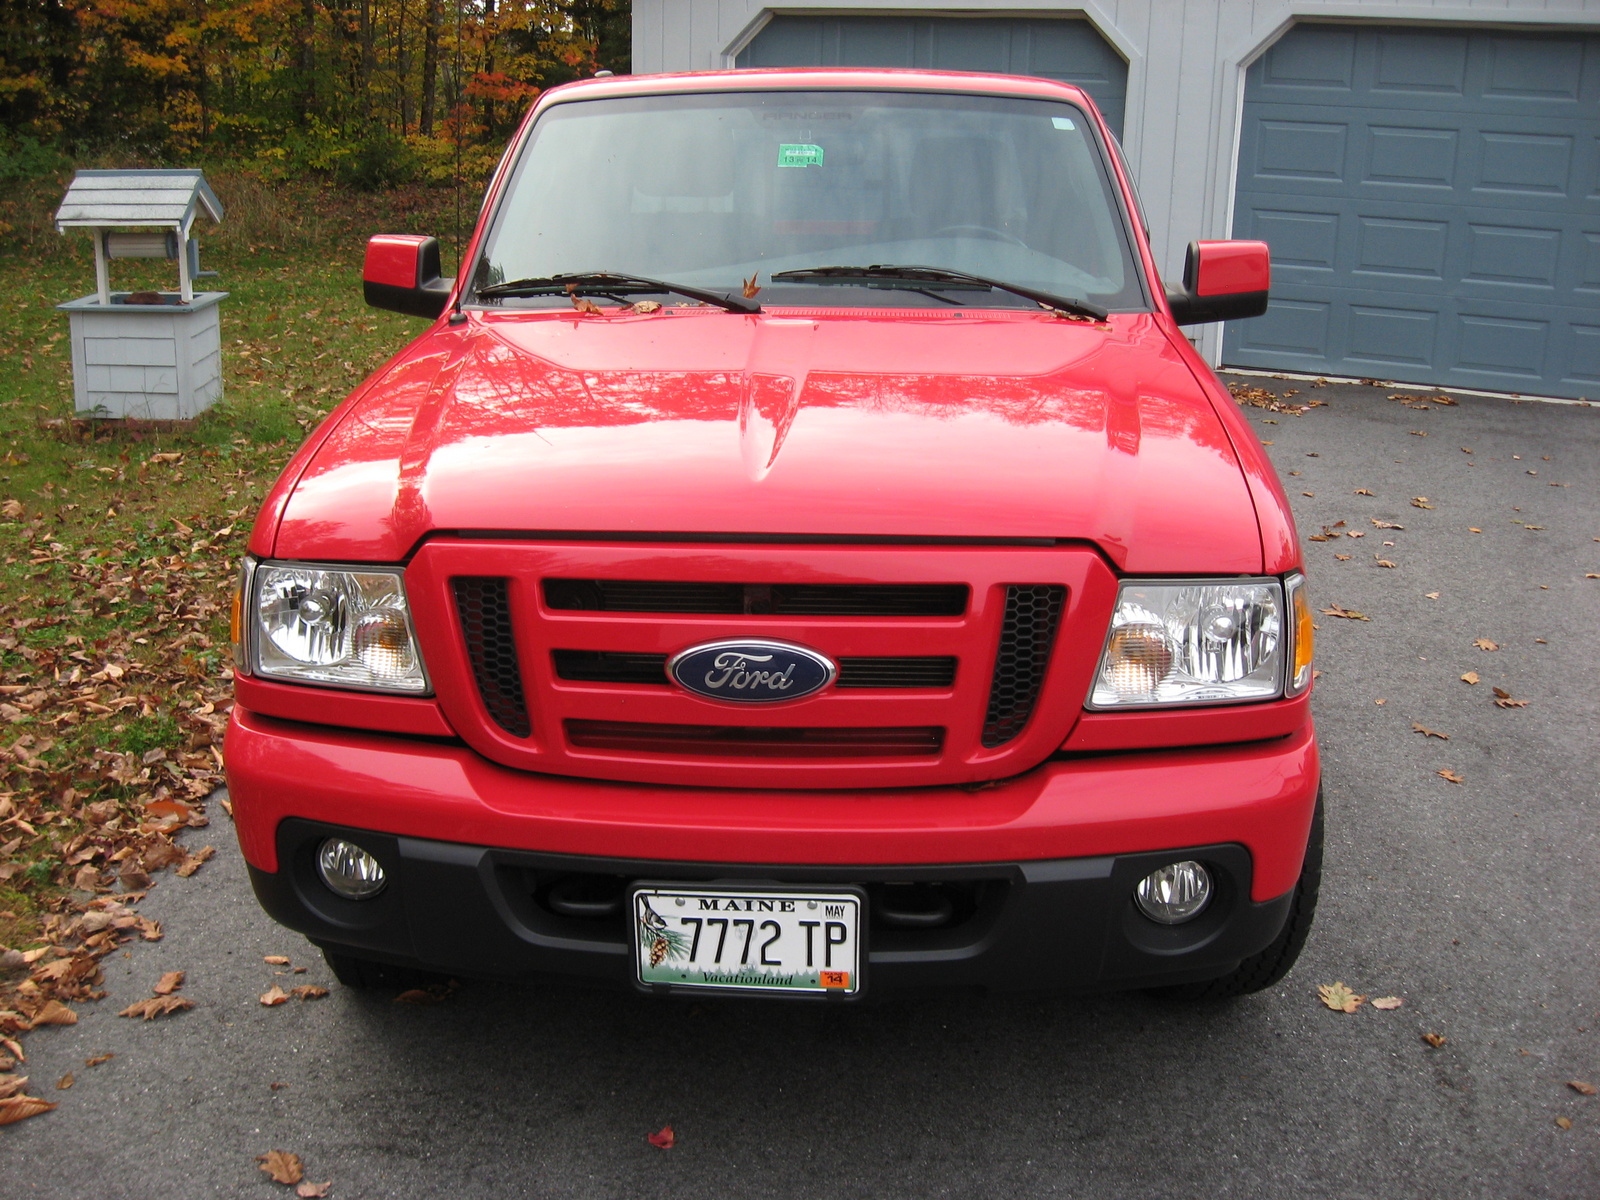 2010 Ford ranger review canada #3